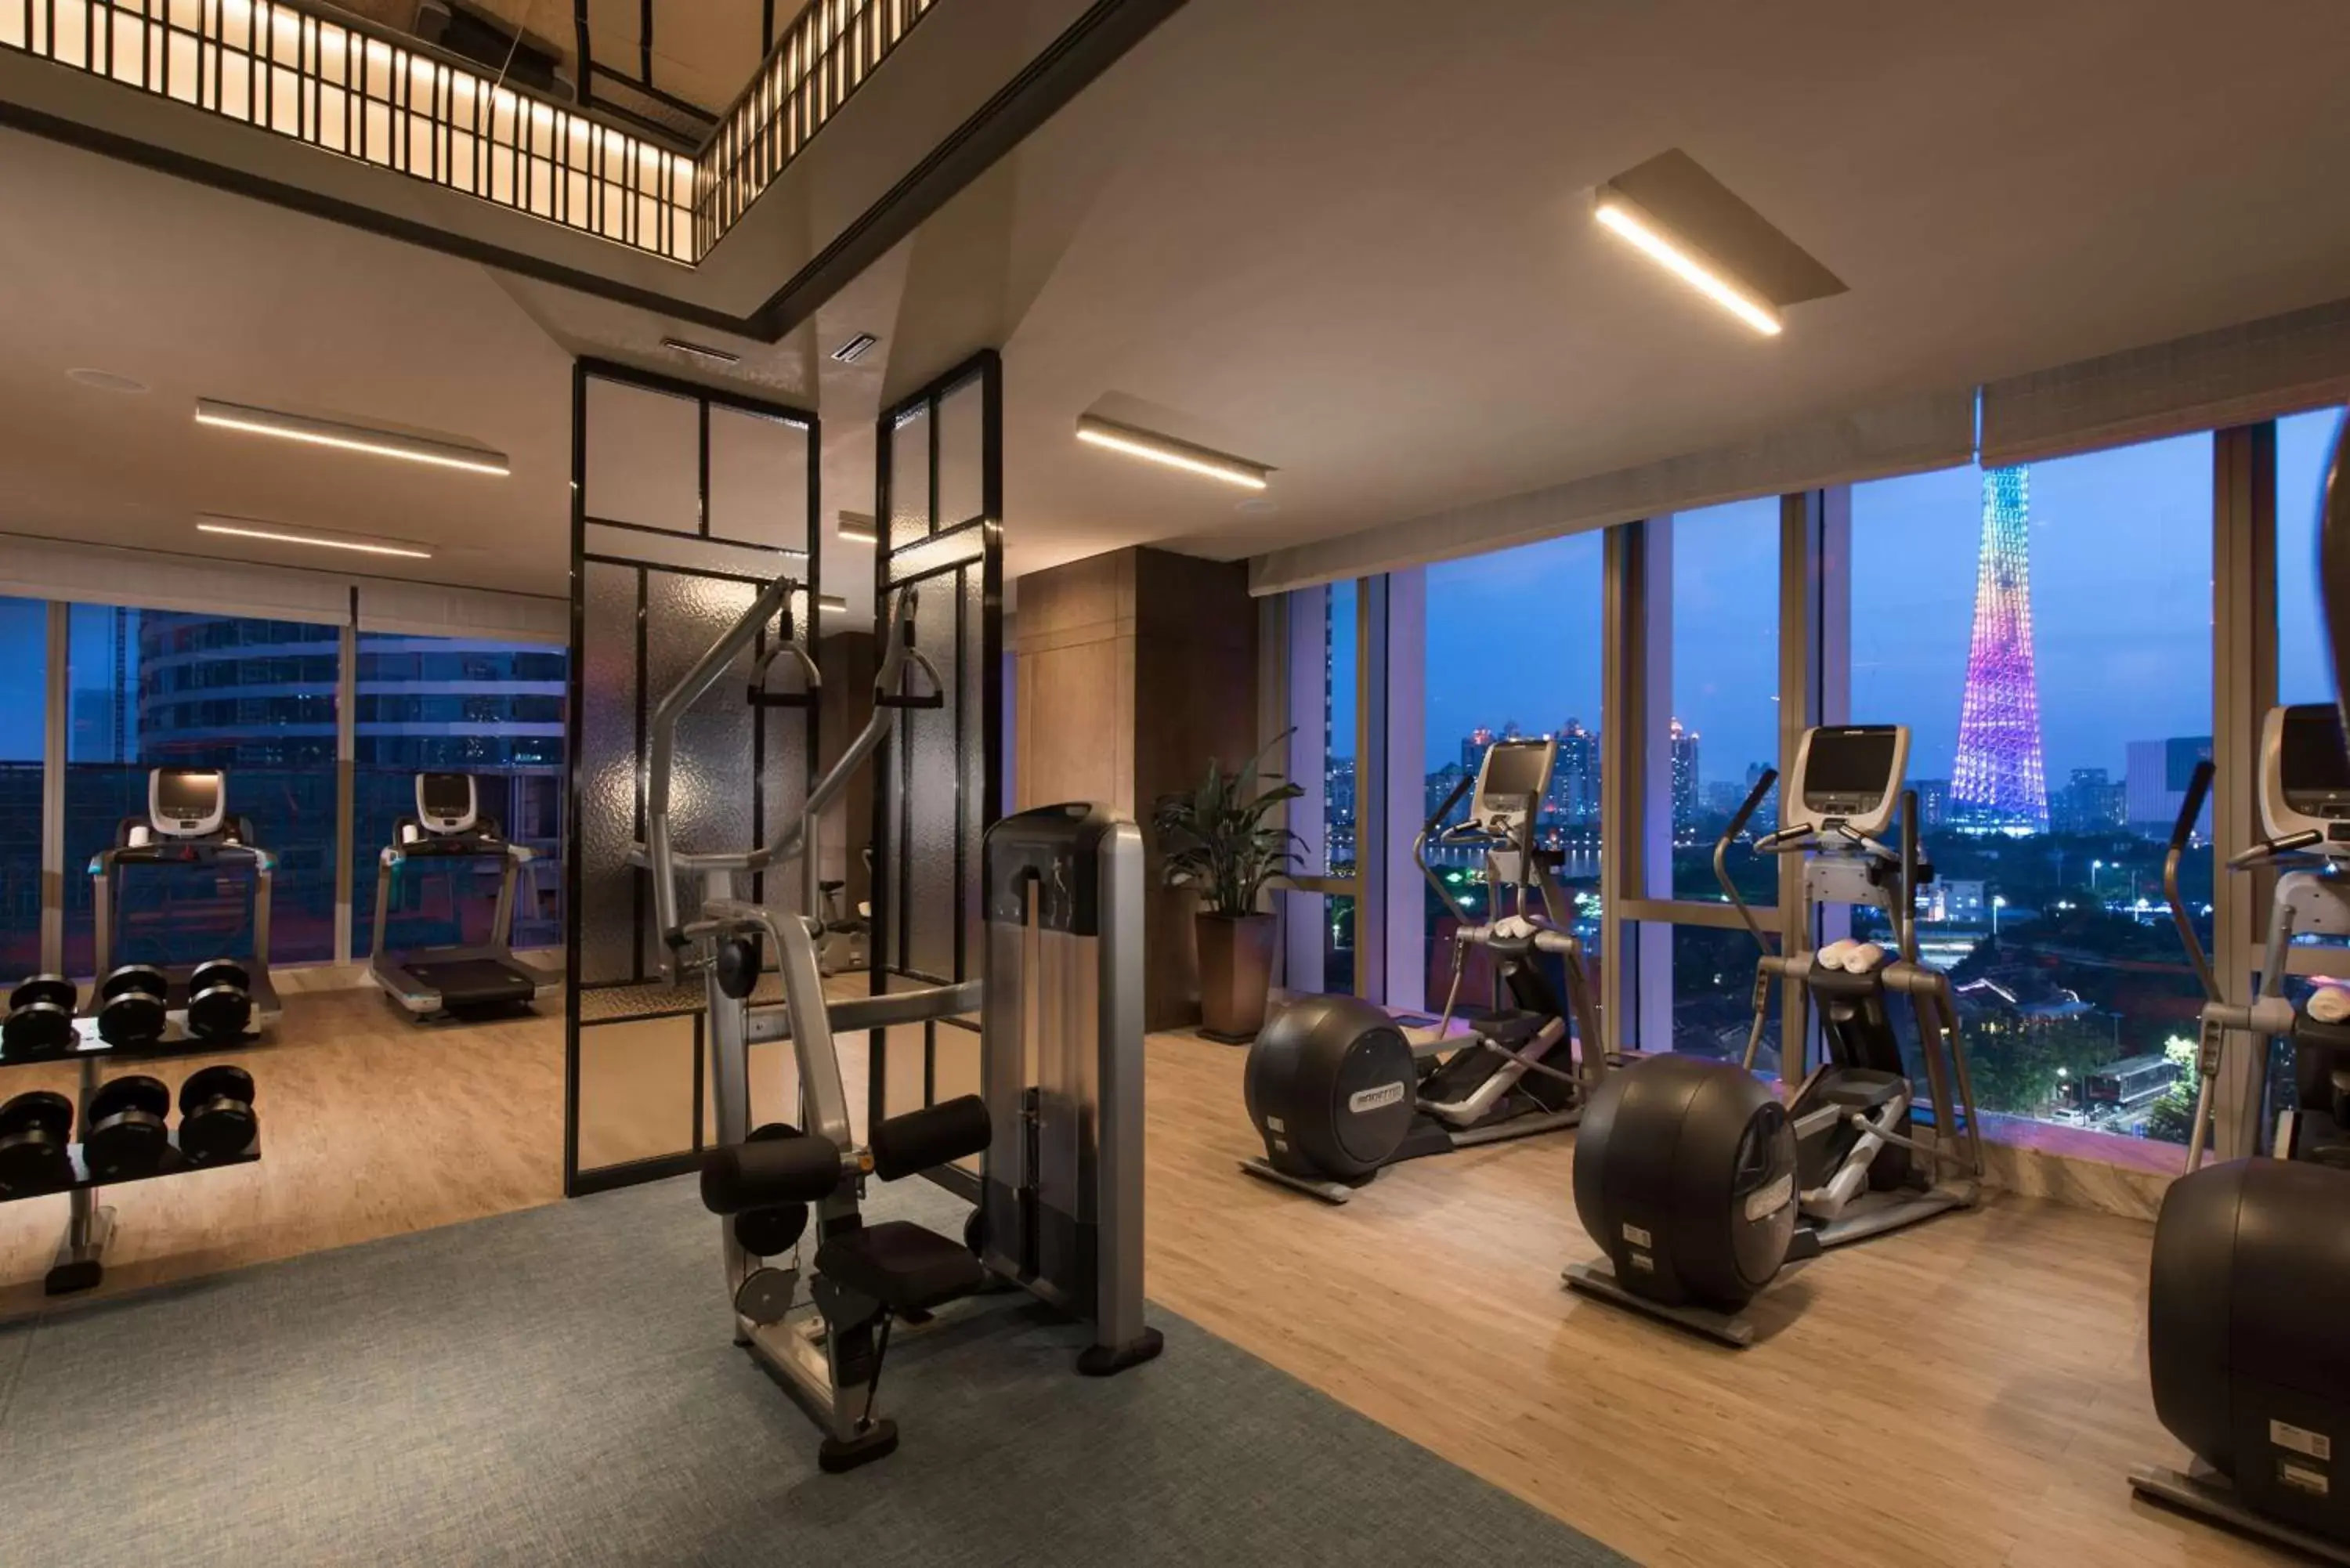 Fitness centre/facilities, Fitness Center/Facilities in Conrad Guangzhou - Free shuttle between hotel and Exhibition Center during Canton Fair & Exhibitor registration Counter